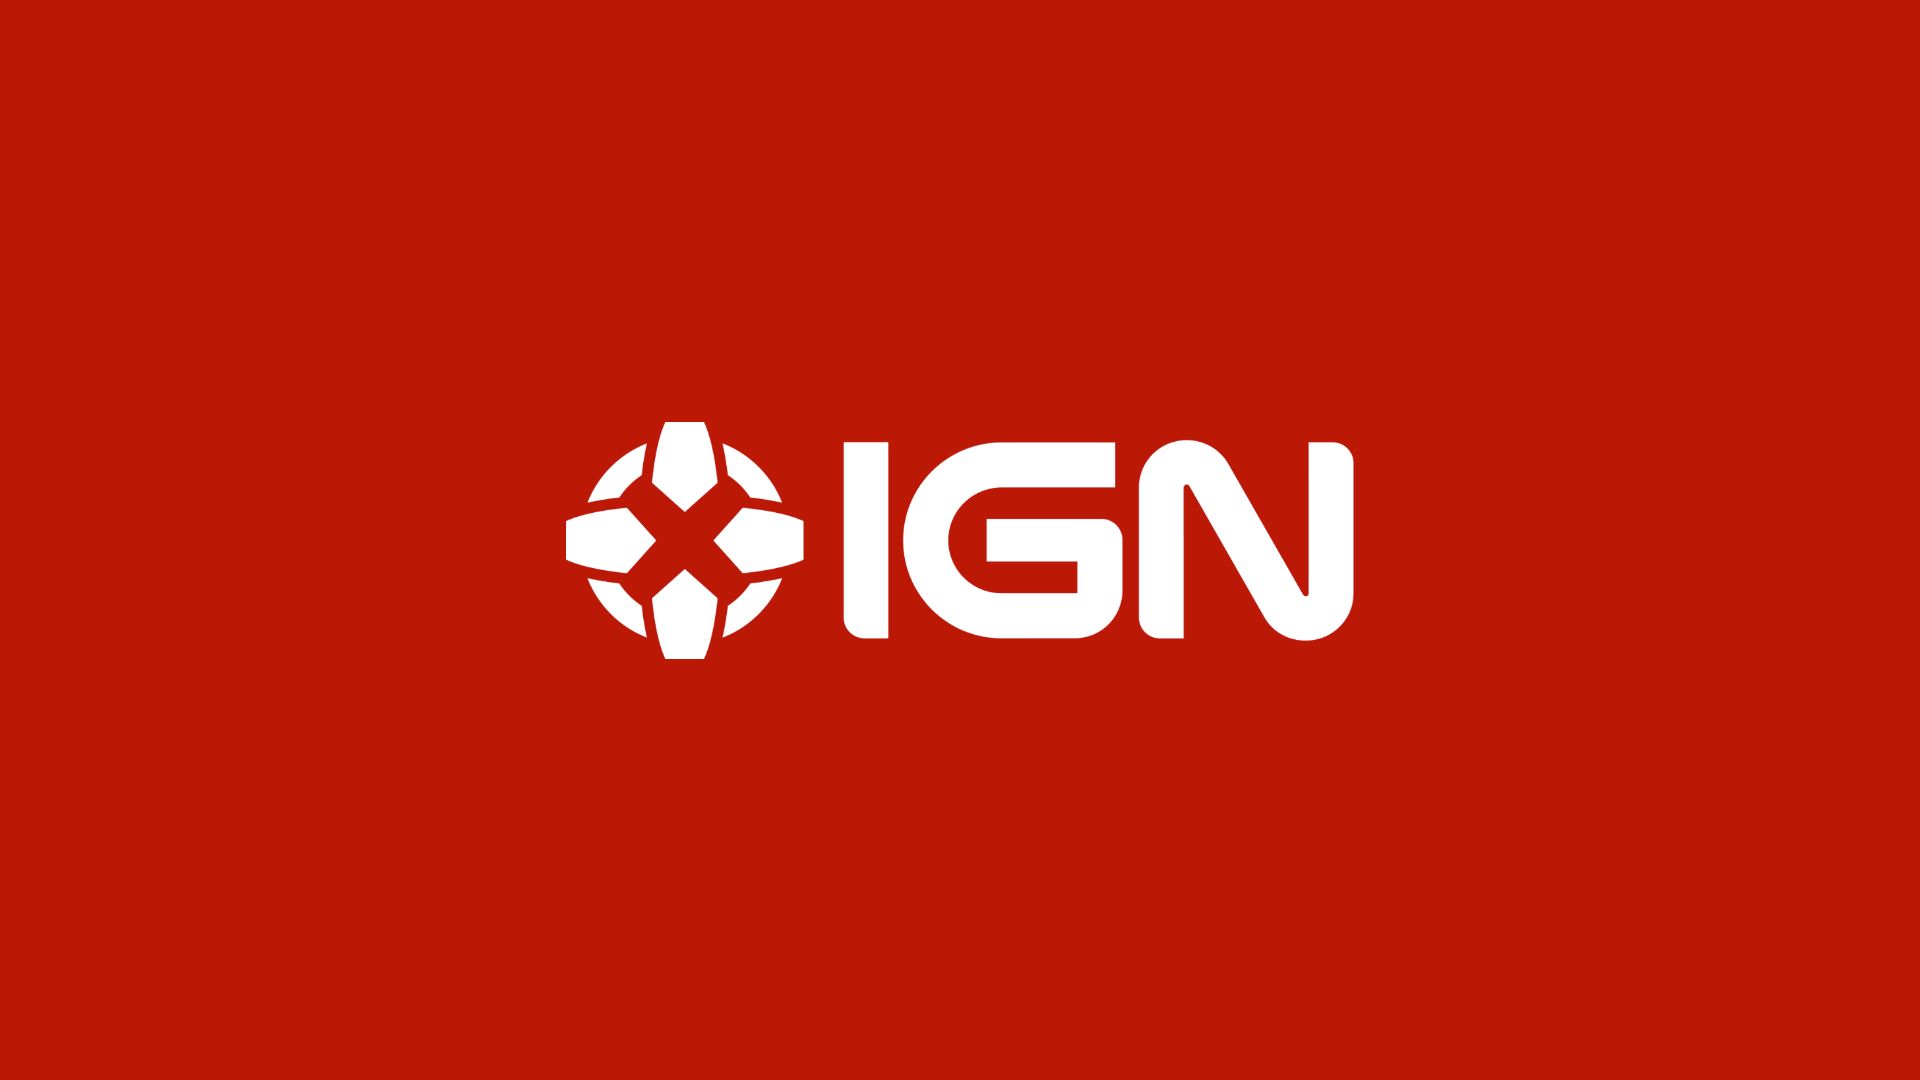 IGN for Xbox